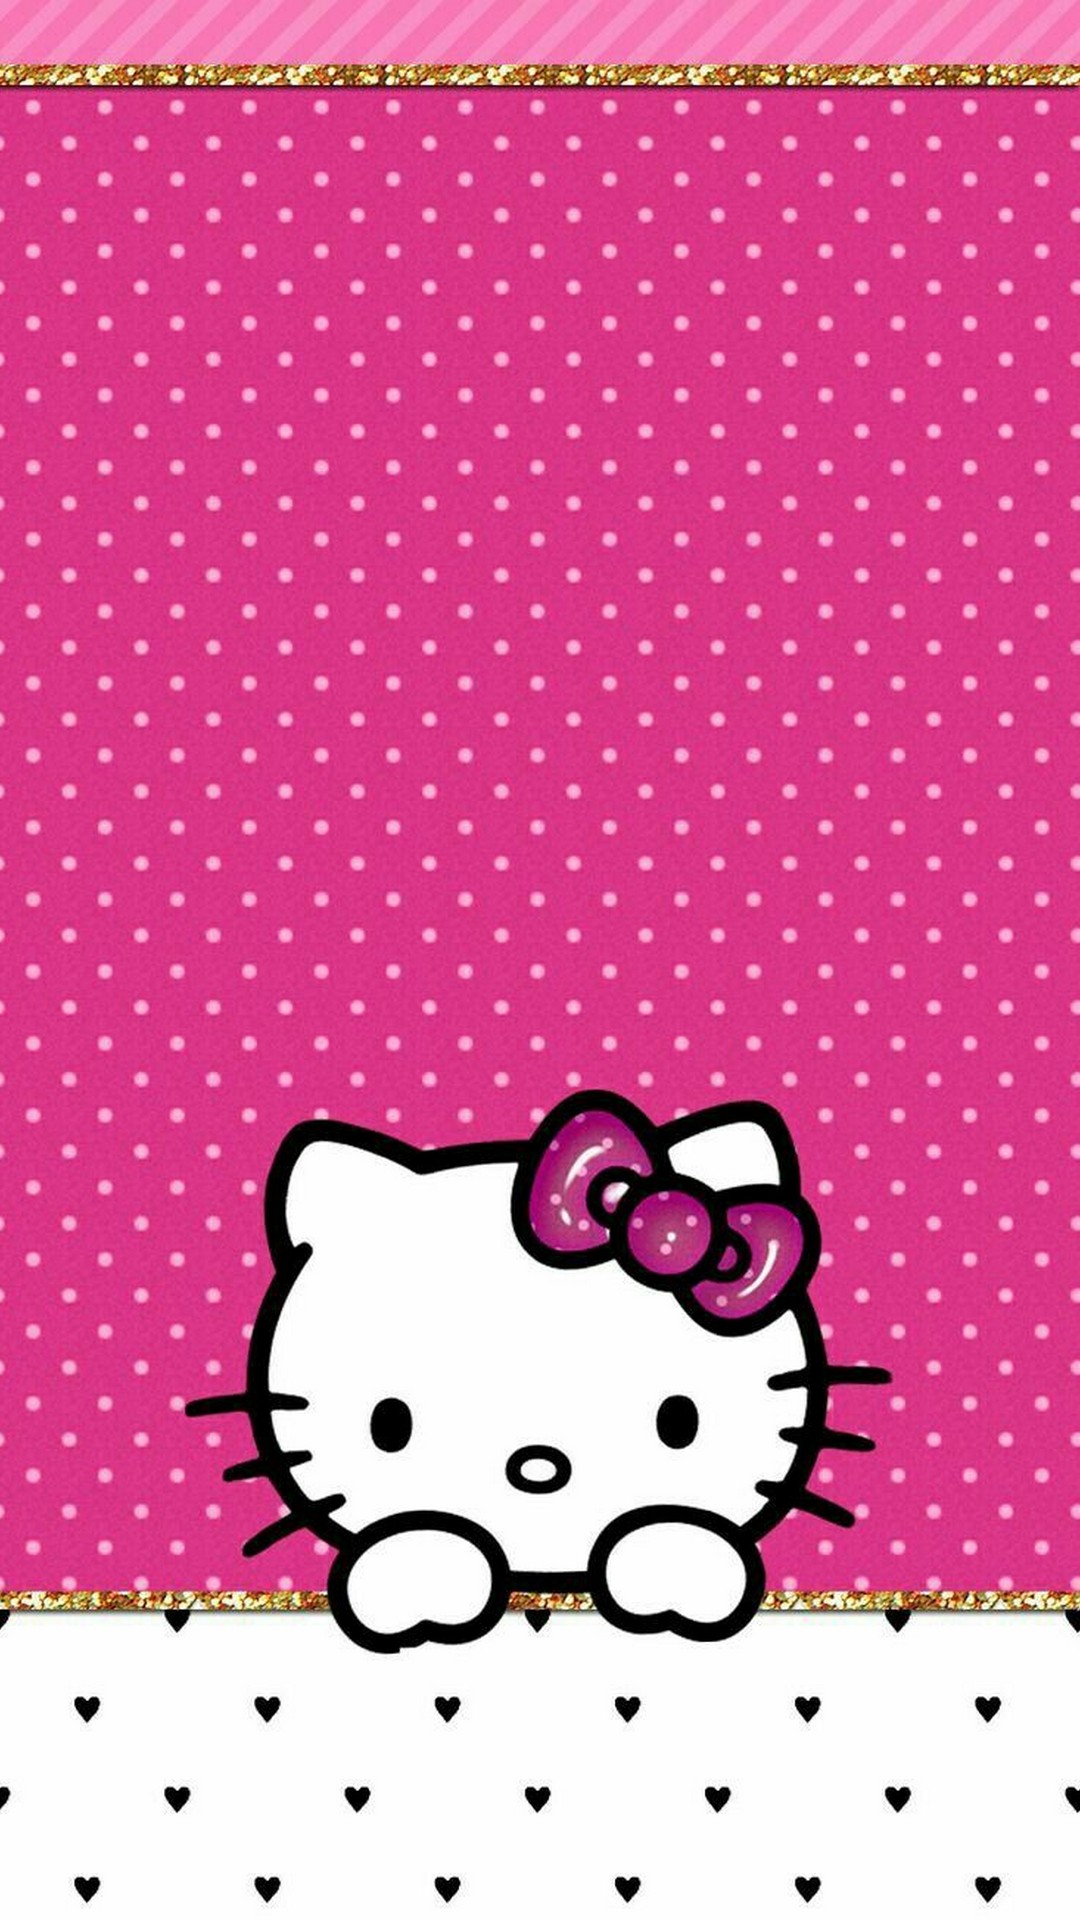 Android Wallpaper Hello Kitty Characters with image resolution 1080x1920 pixel. You can make this wallpaper for your Android backgrounds, Tablet, Smartphones Screensavers and Mobile Phone Lock Screen